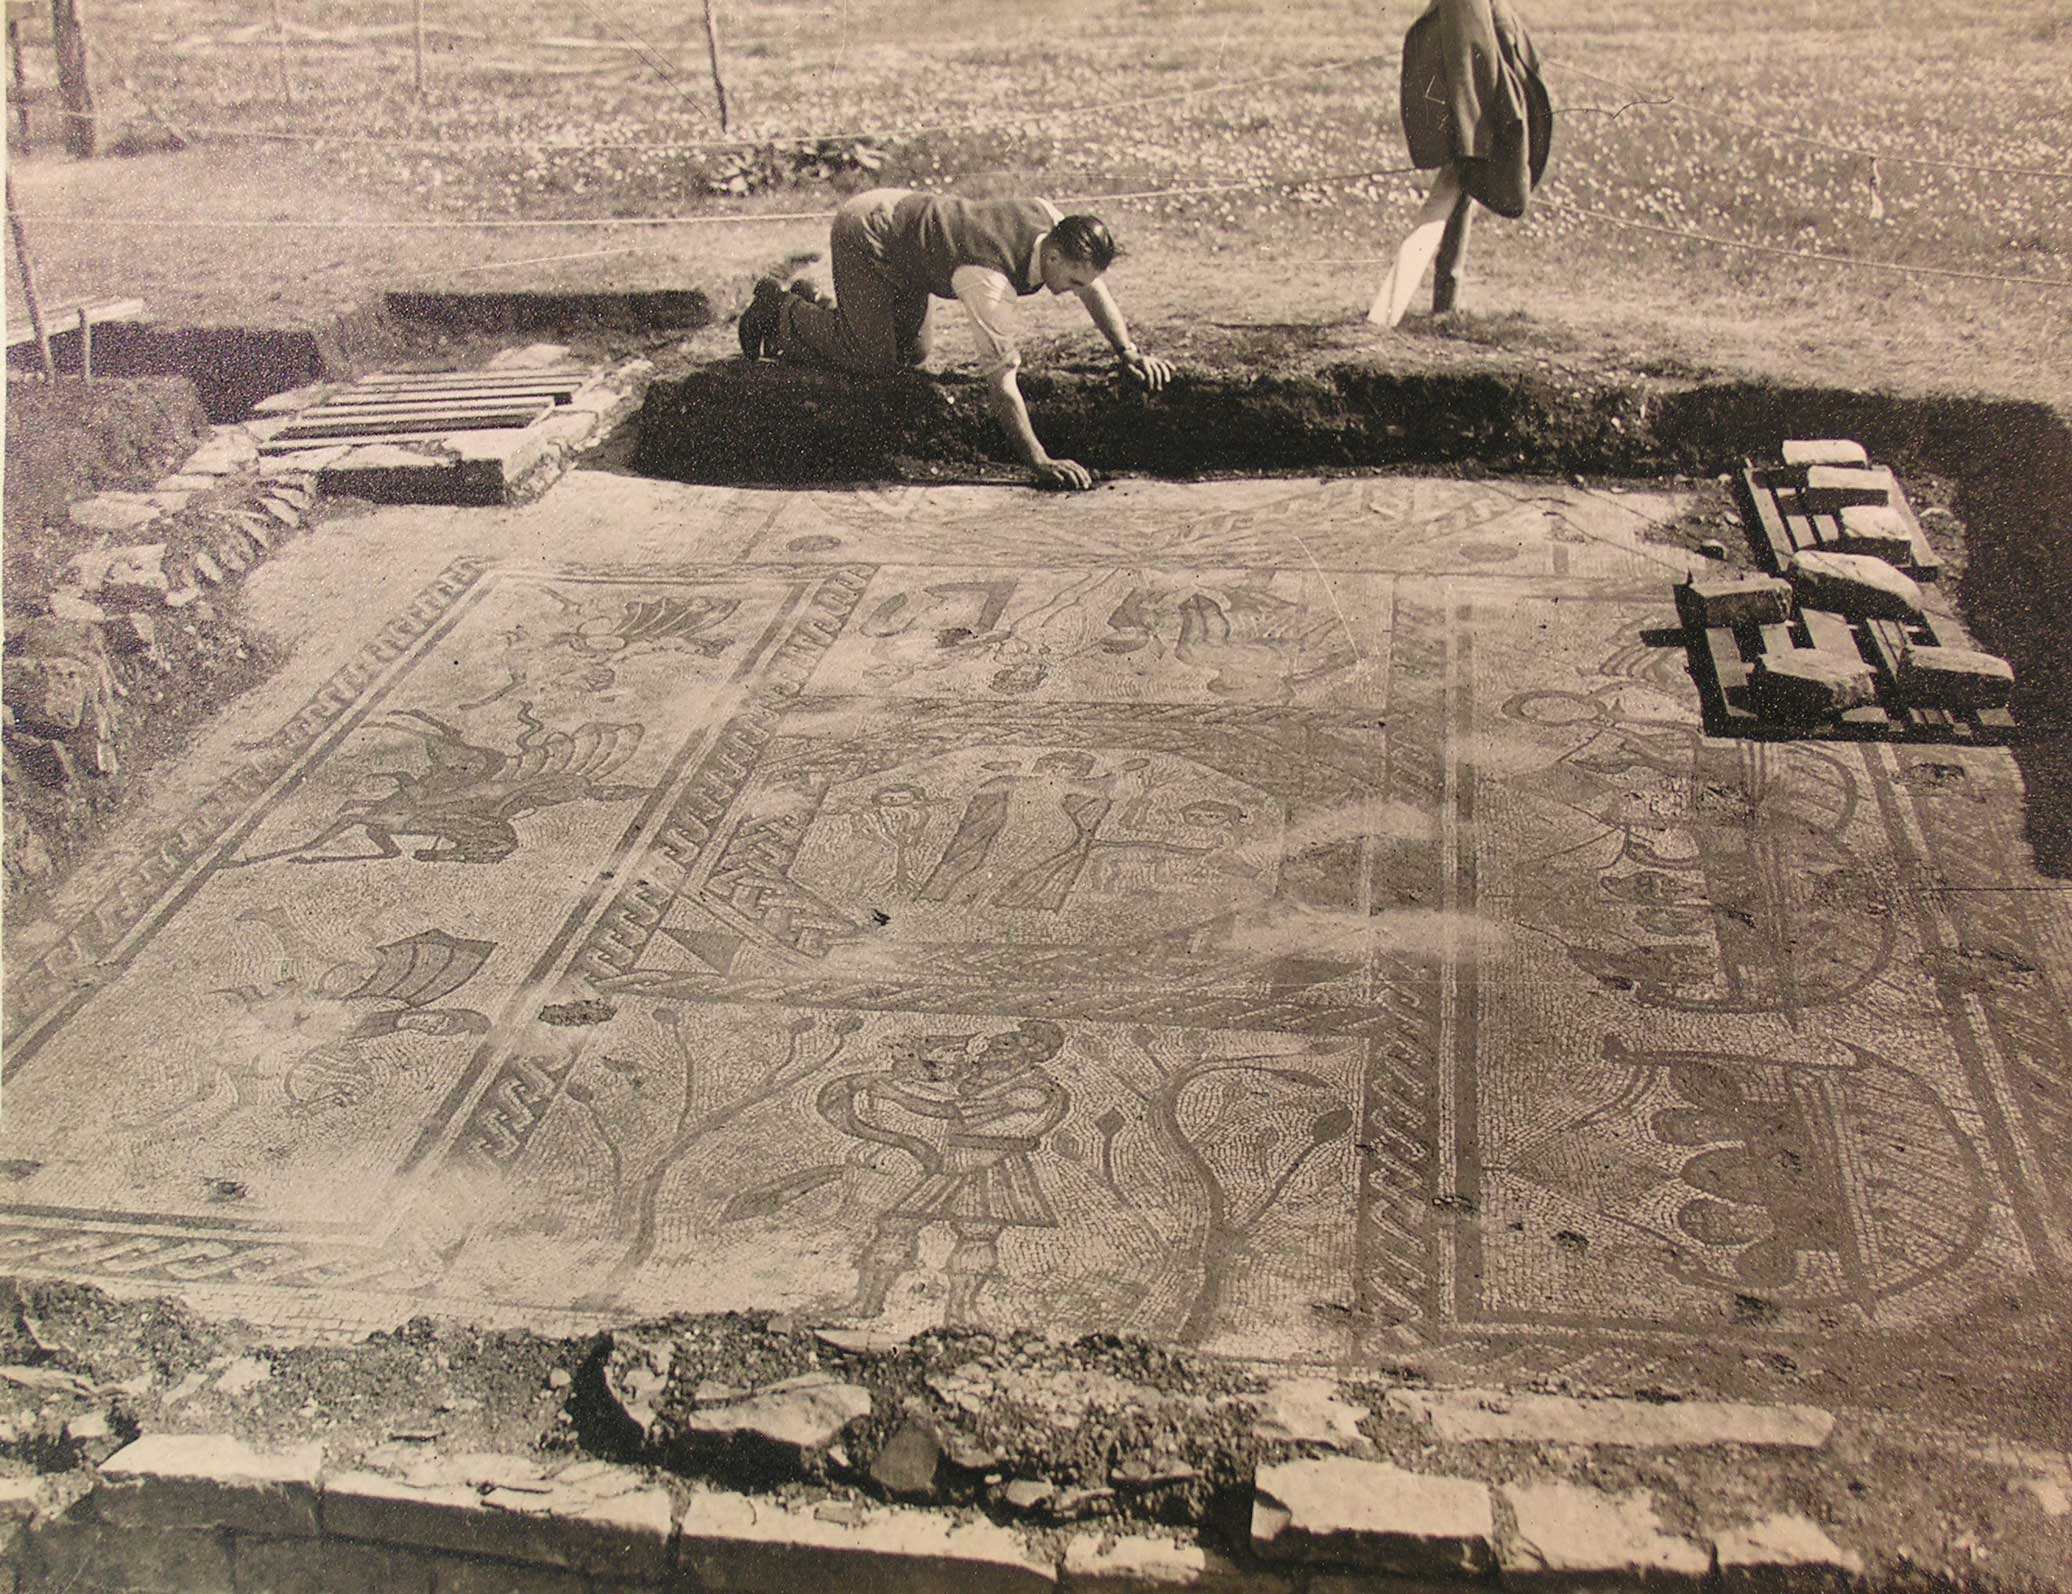 Black and white archive photograph of an archaeologist uncovering a buried mosaic floor depicting a classical mythological scene.